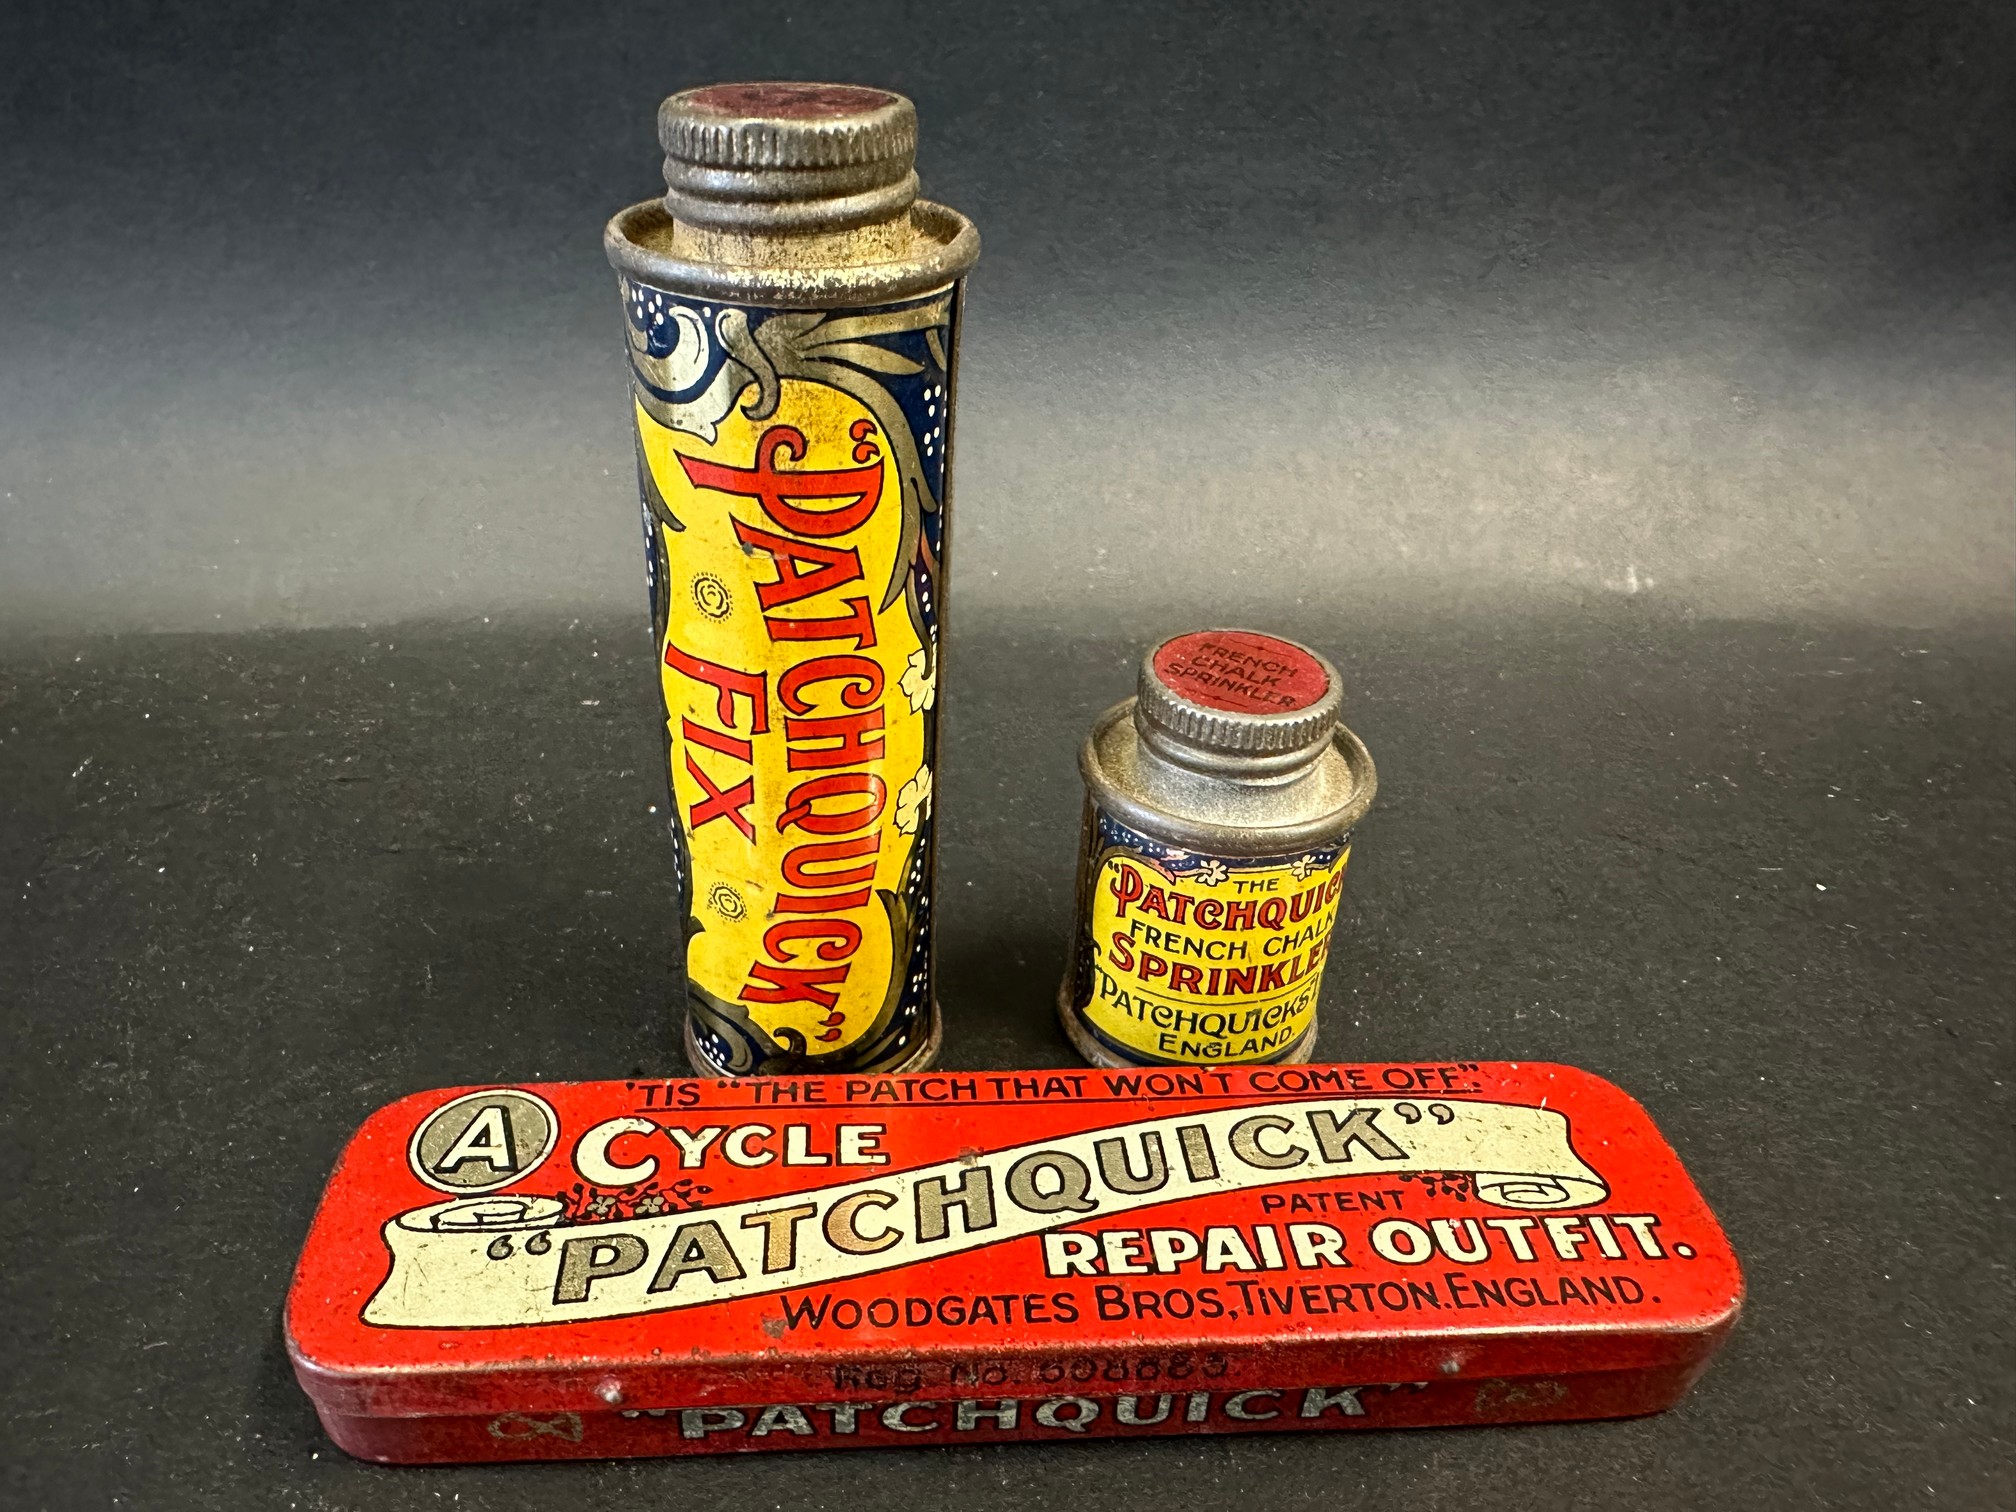 A Patchquick Cycle Repair Outfit and two Patchquick cylindrical tins all in very good condition.